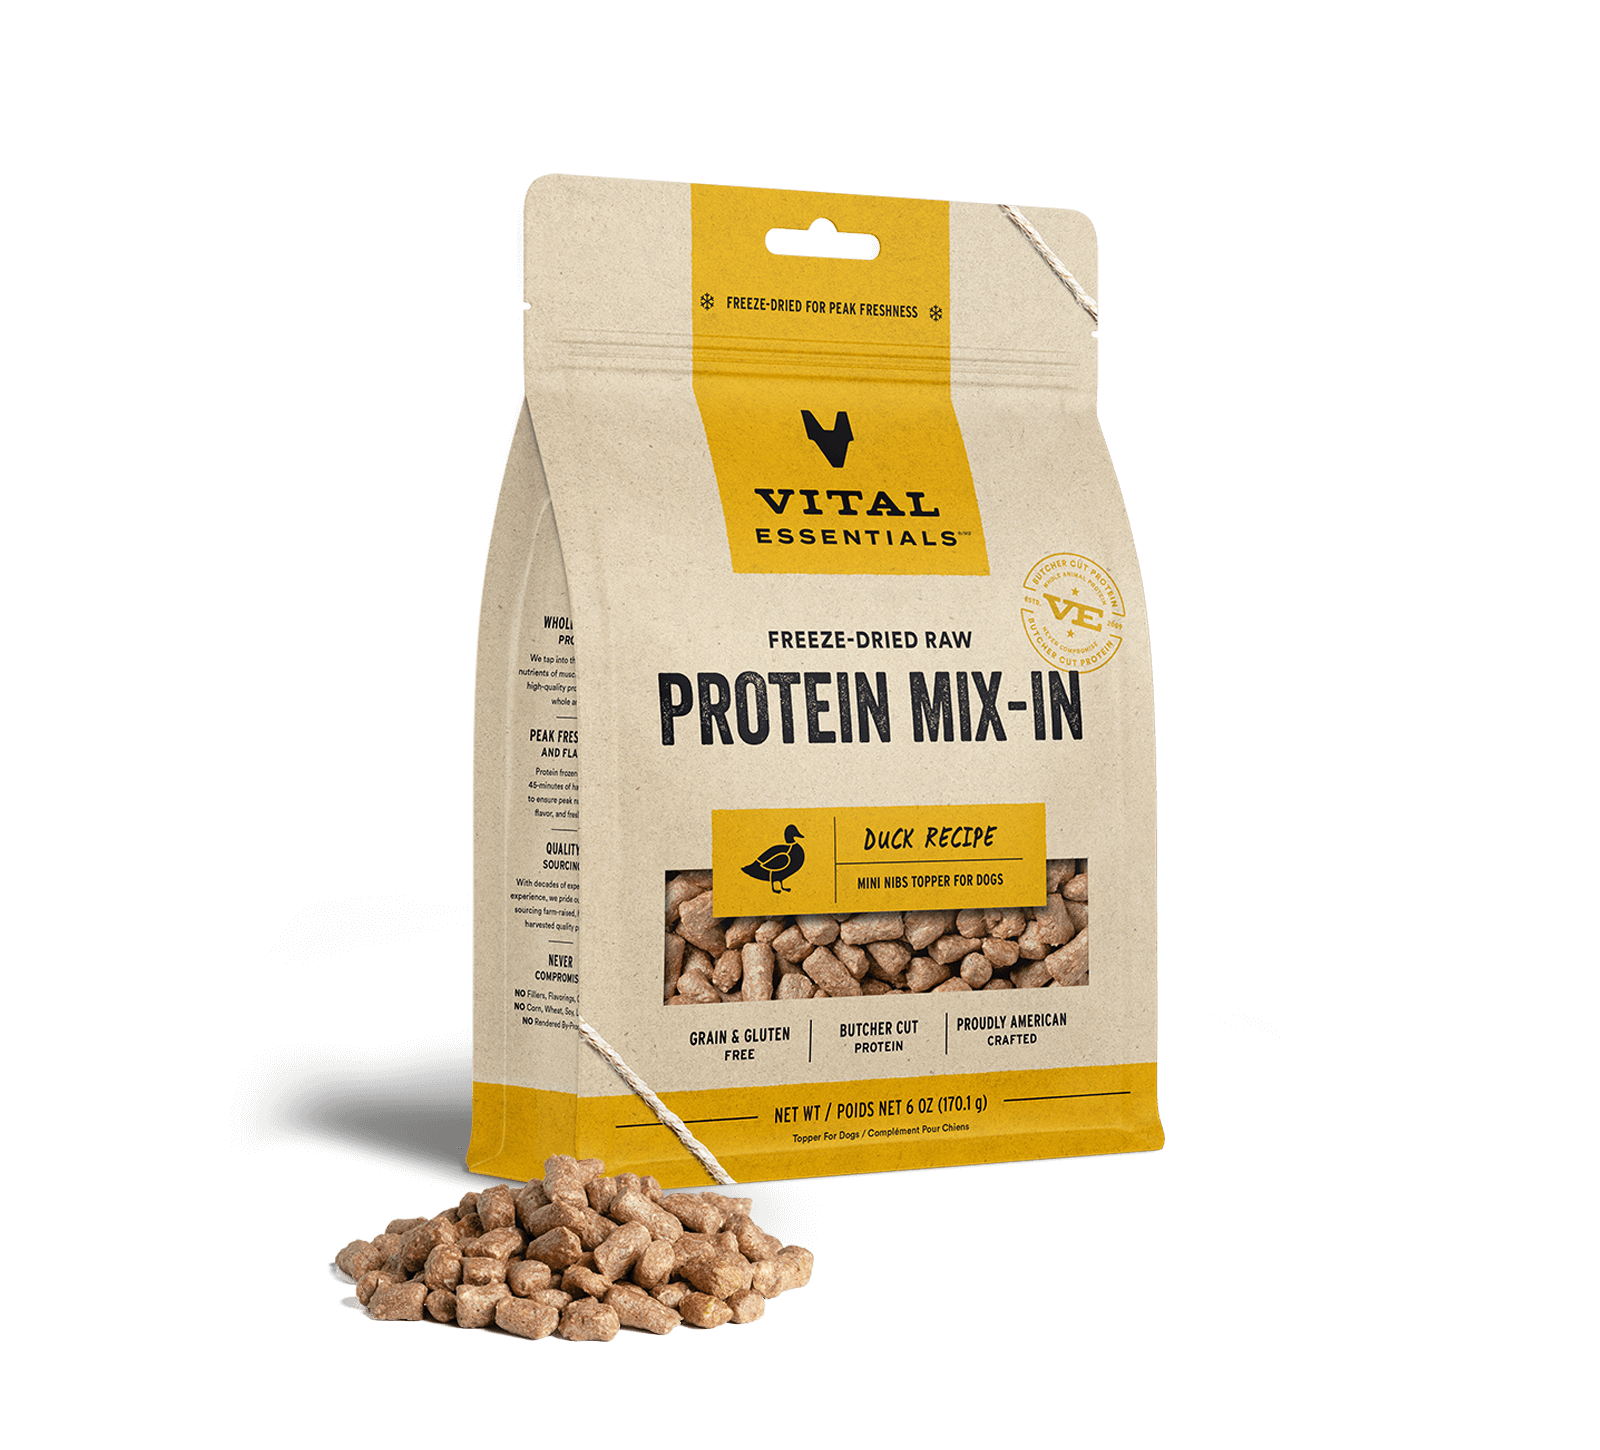 Vital Essentials Freeze-Dried Raw Protein Mix-In Duck Recipe Mini Nibs Topper for Dogs, 6 oz - Healing/First Aid